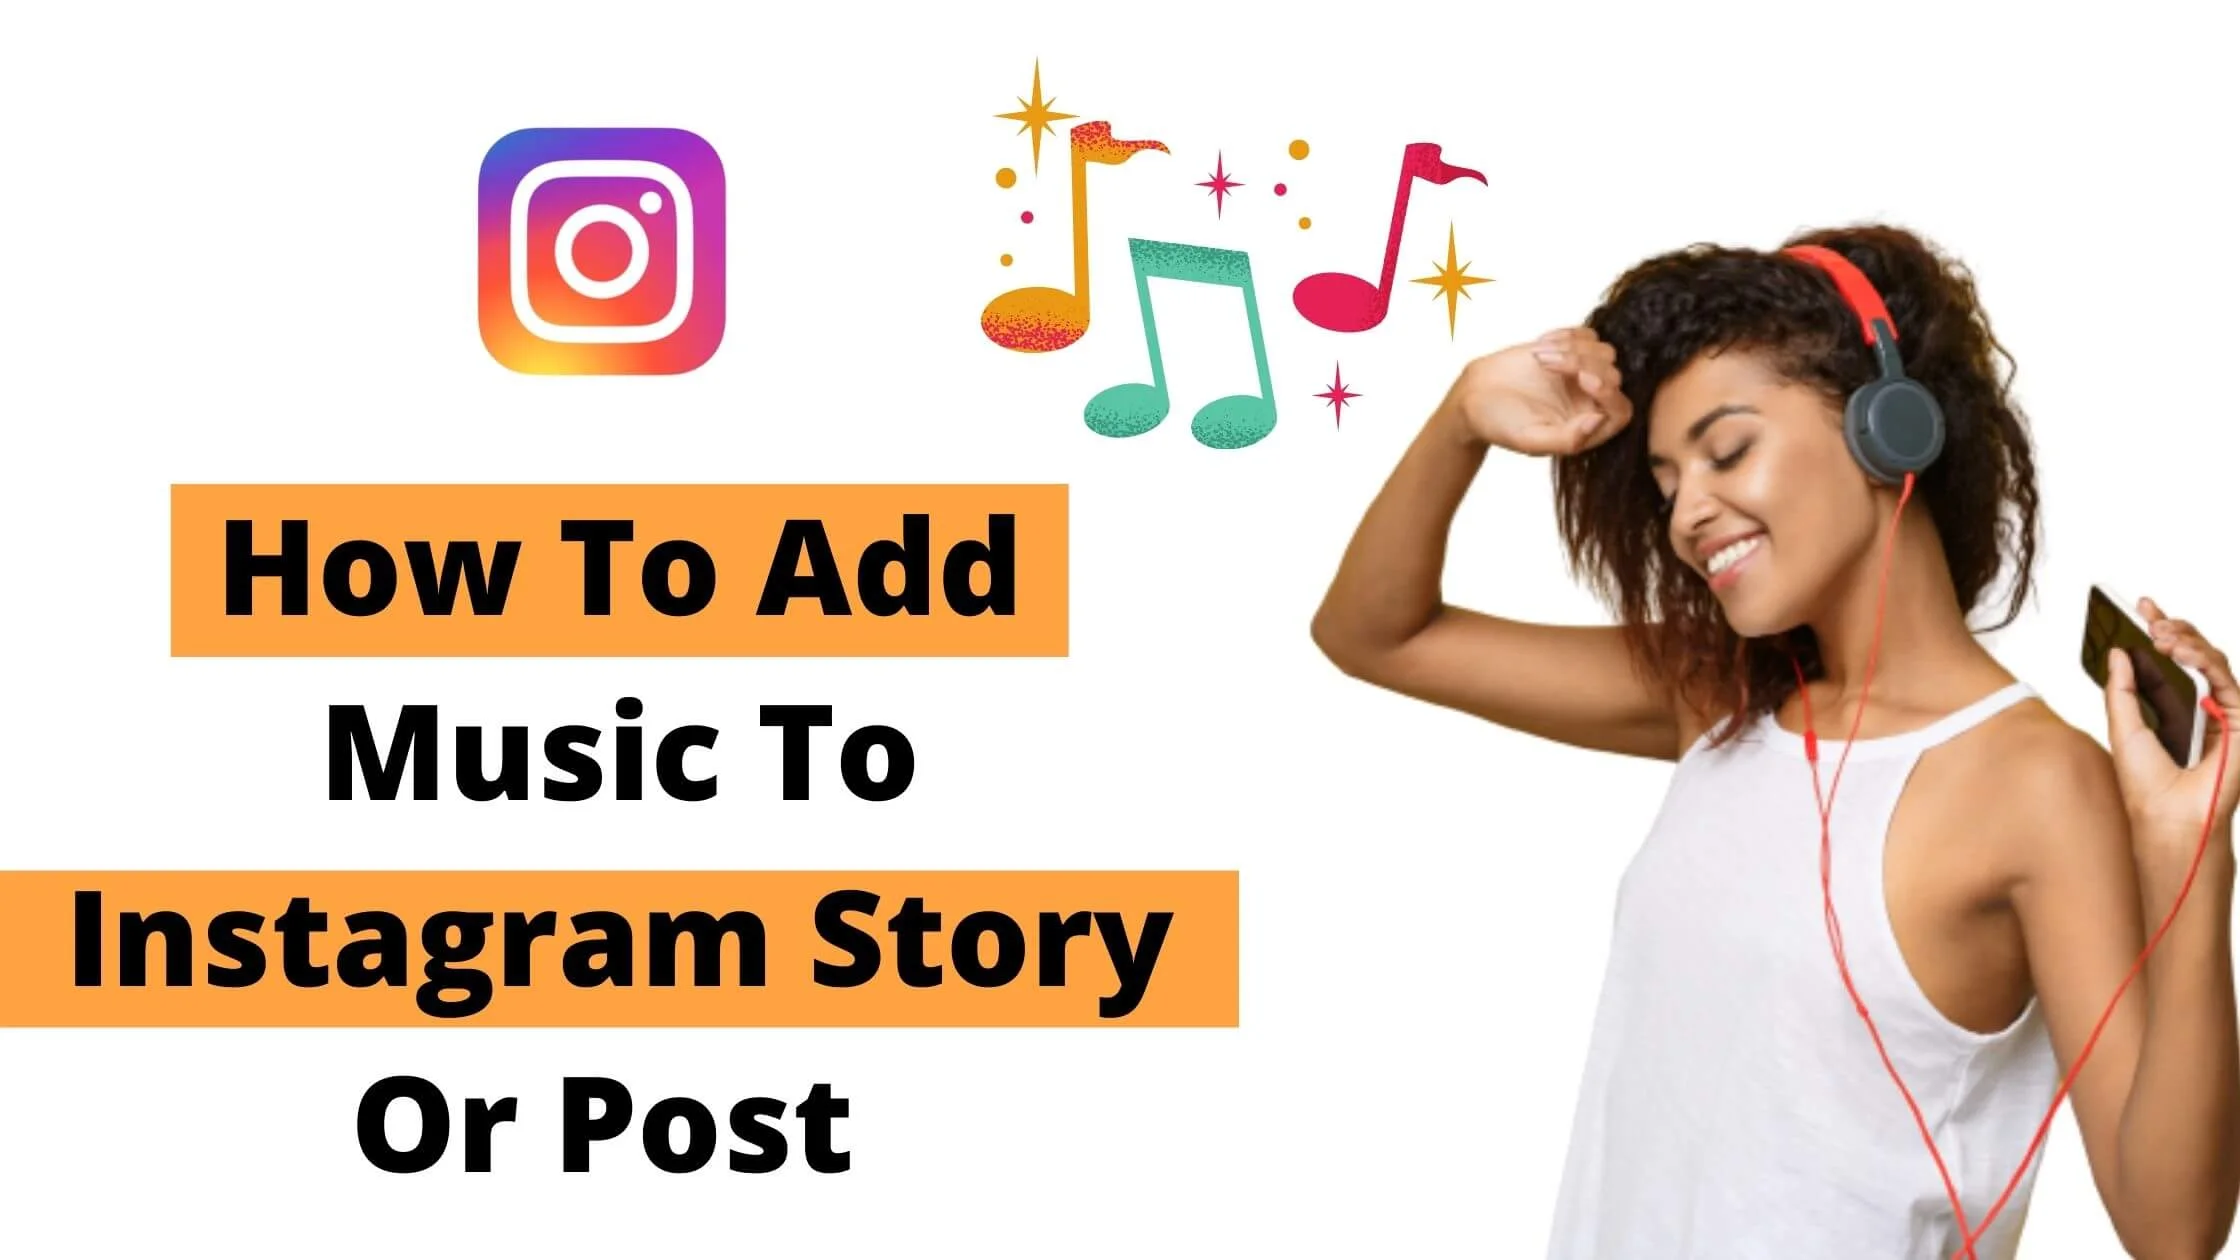 How To Add Music To Instagram Story Or Post